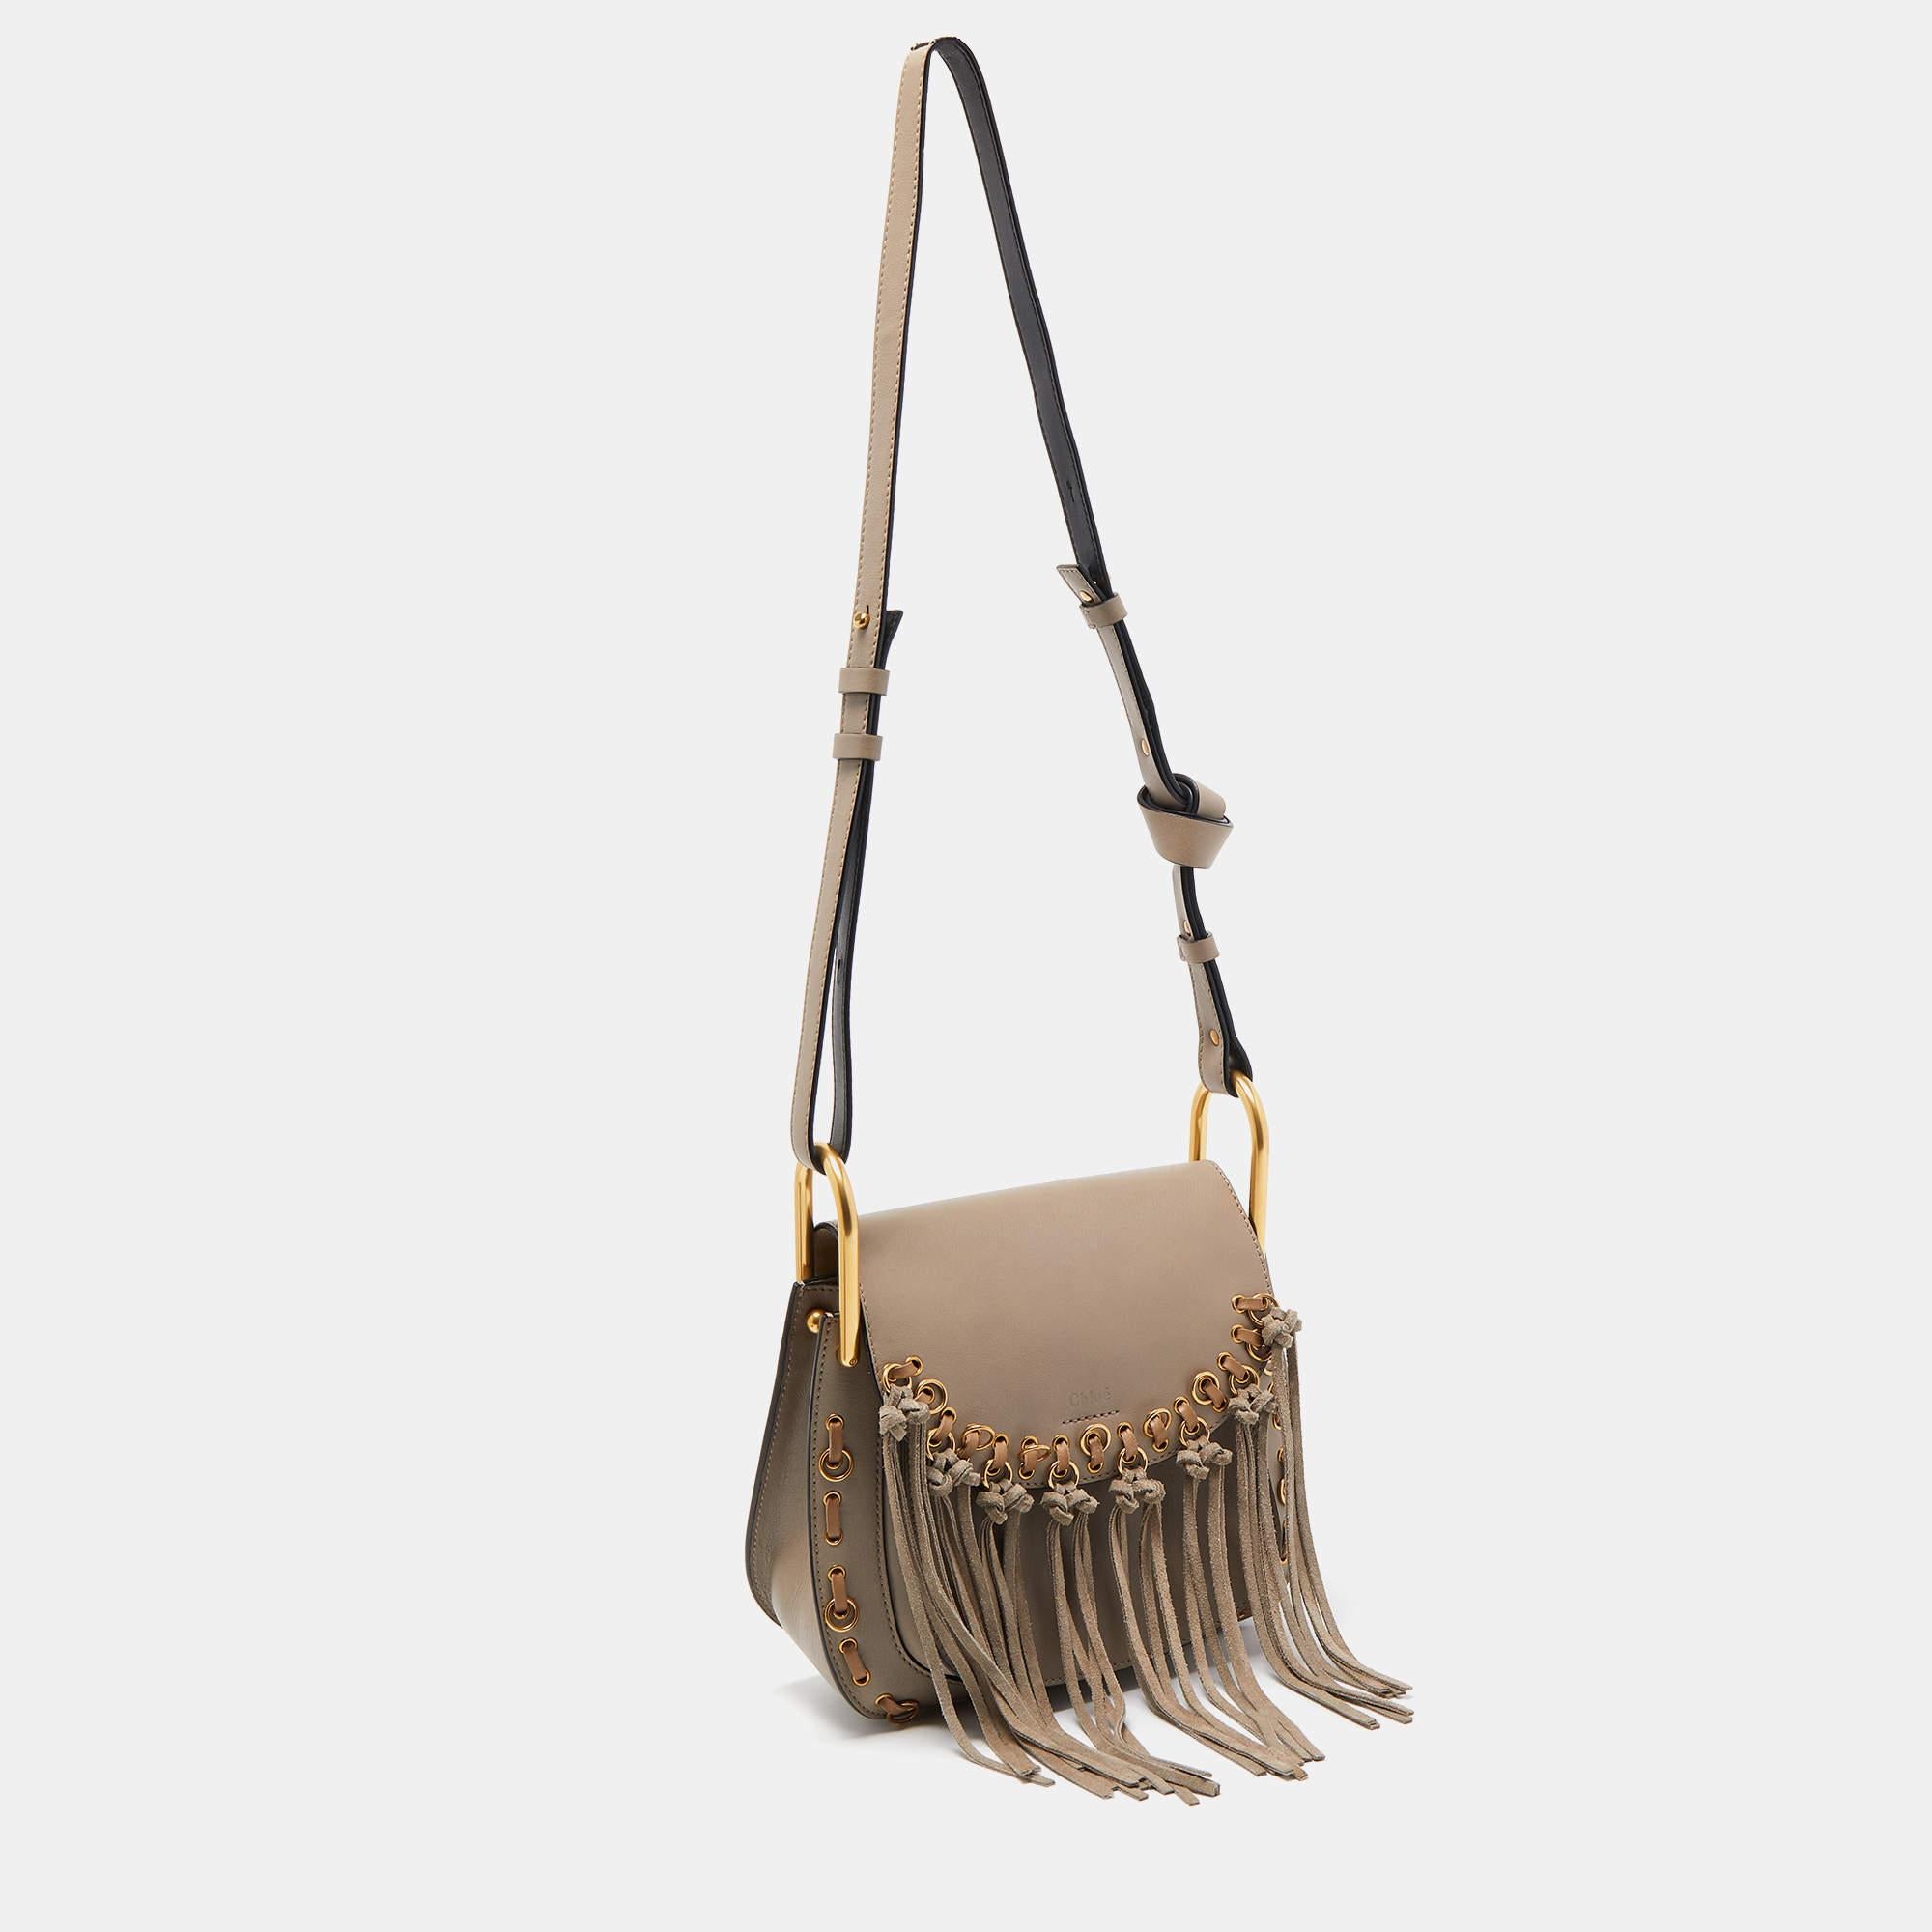 Enriched with chic aesthetics, this Chloe Hudson bag will be a standout piece in your closet. Like every creation from the brand, it celebrates modern femininity and will never go out of style. Crafted from leather, it is beautifully decorated with